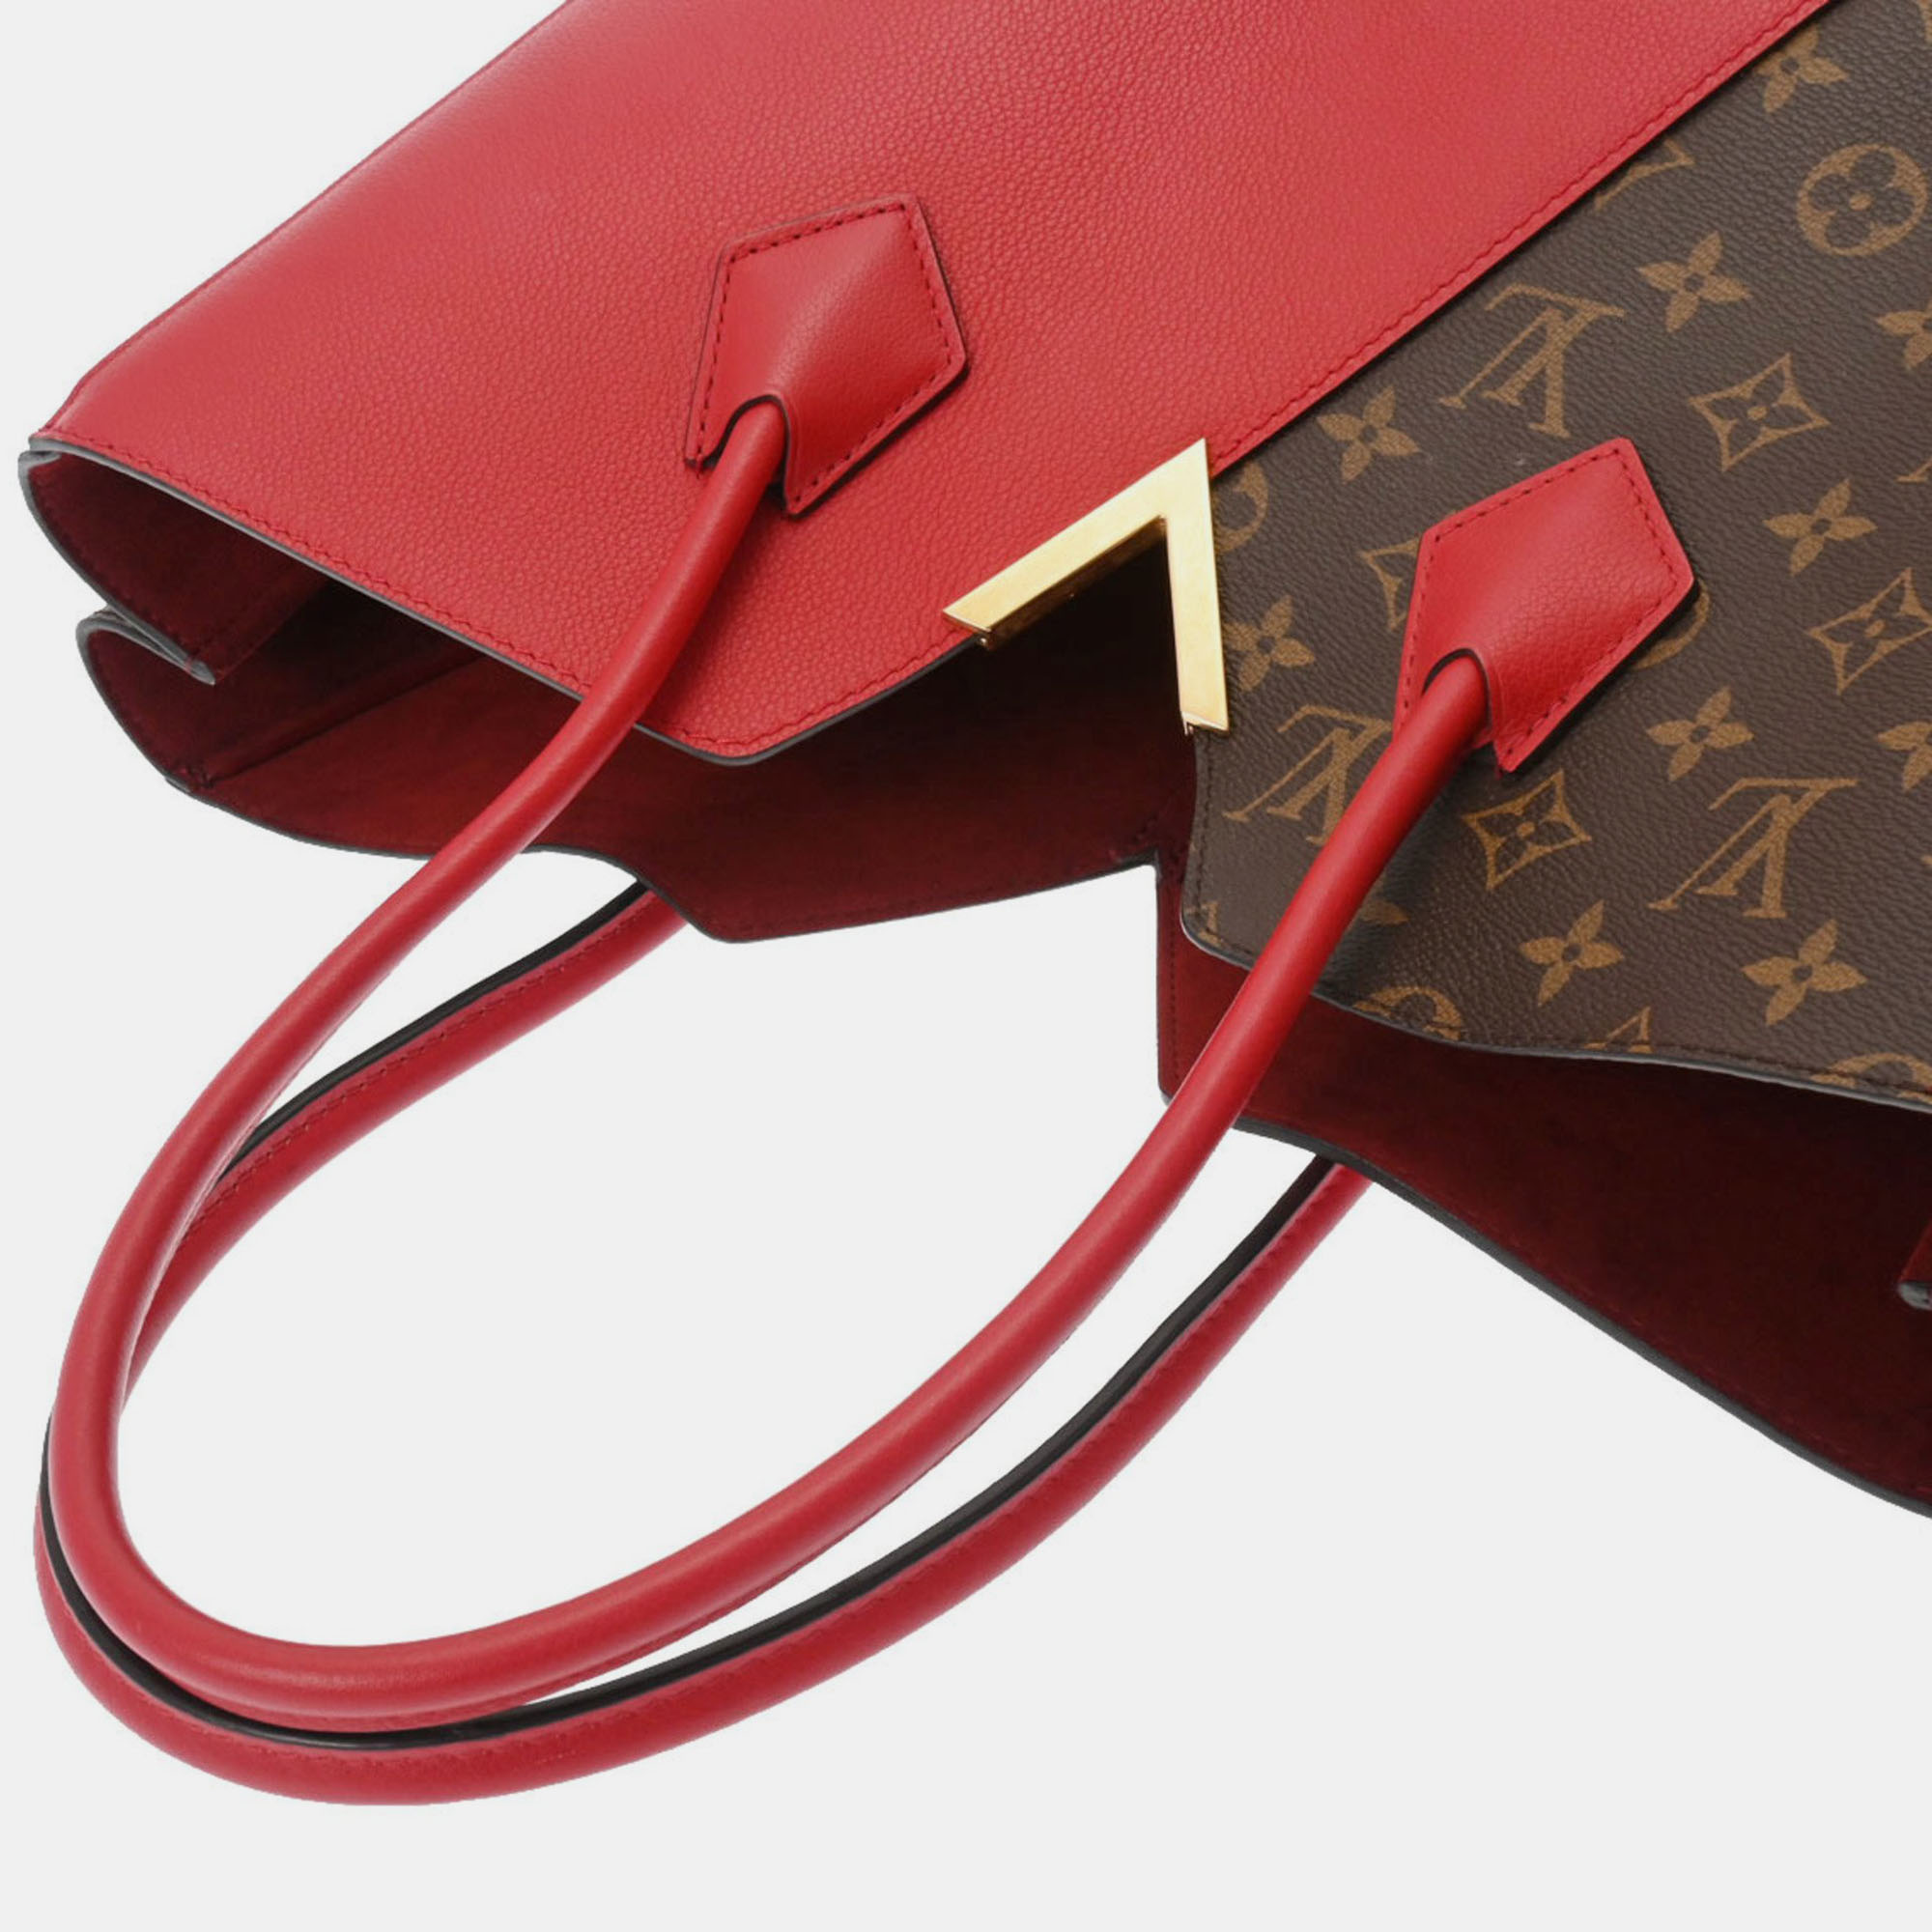 Louis Vuitton Red Leather And Monogram Canvas Kimono MM Tote Bag